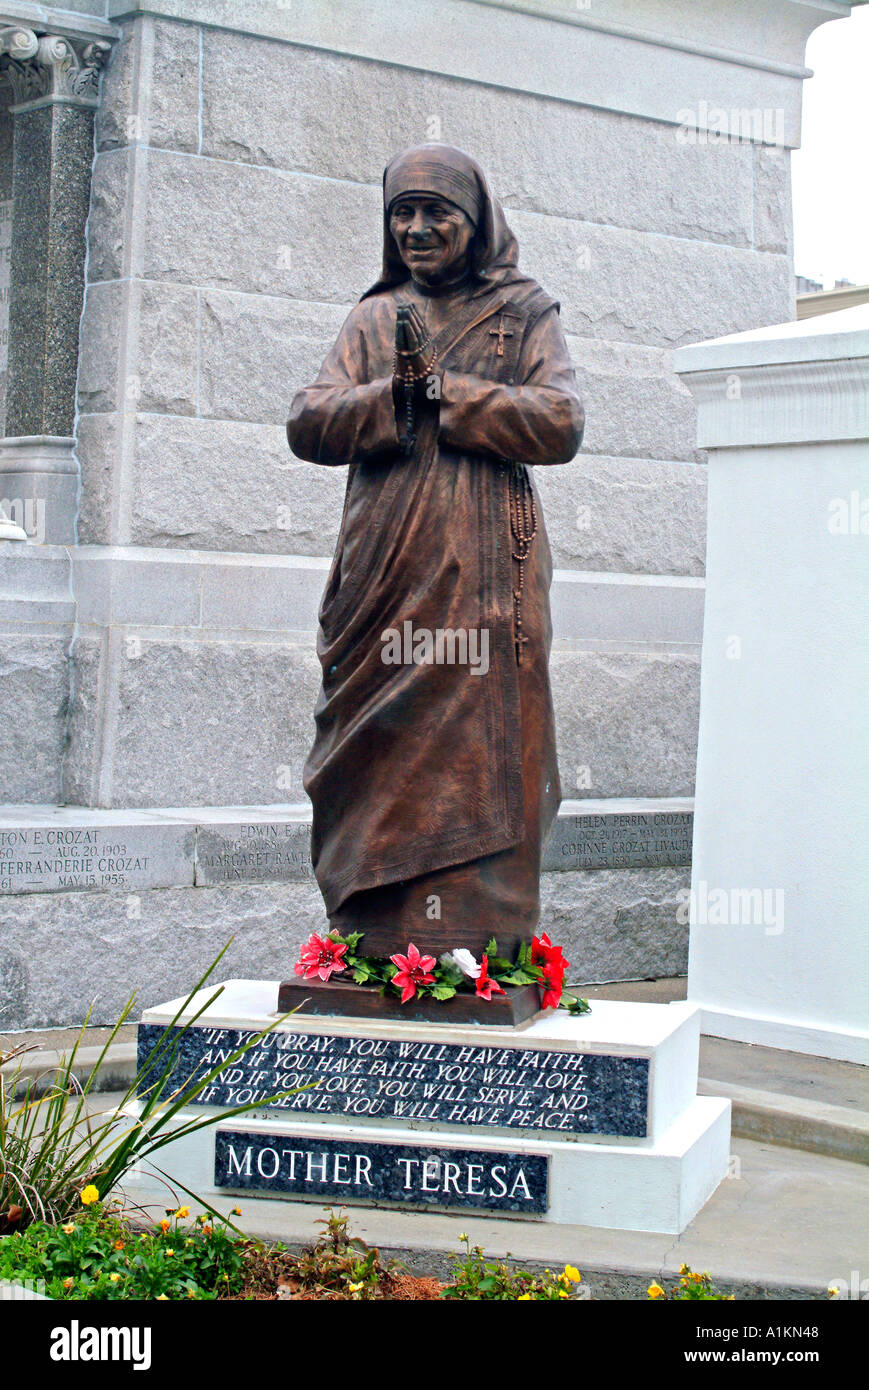 Statue of Mother Teresa in New Orleans Louisiana cemetery Stock Photo